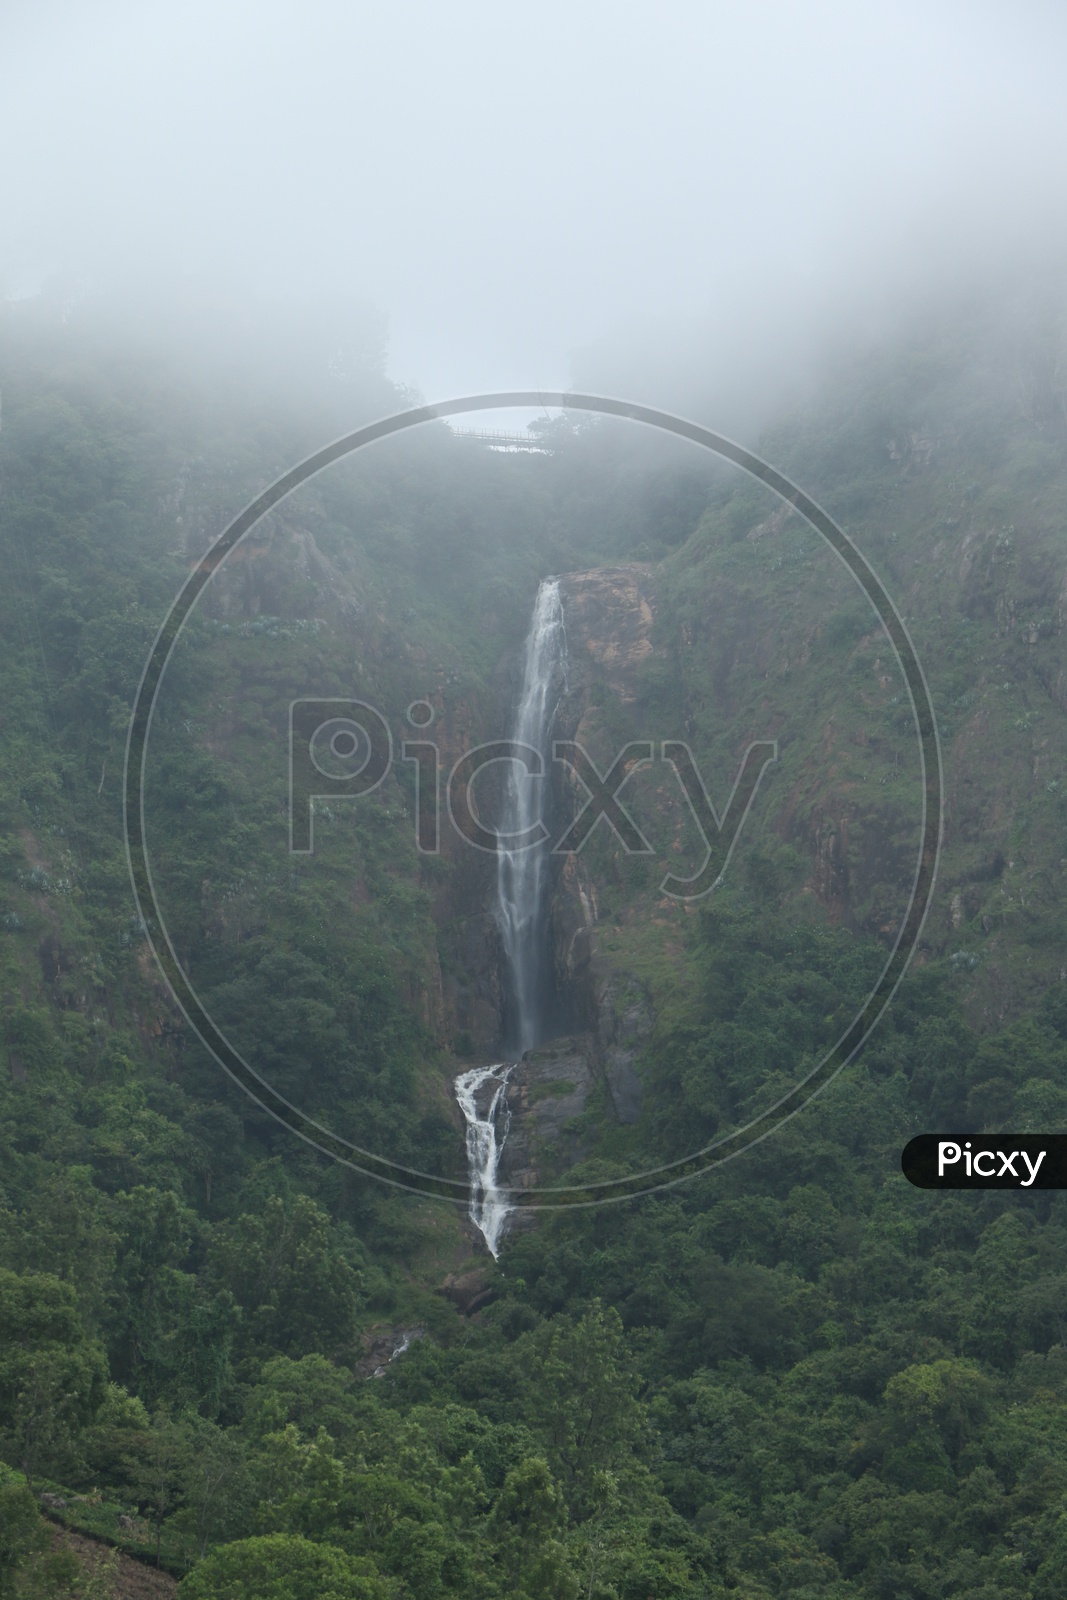 A Water Falls Falling From The top of rocks in a hill In Ooty